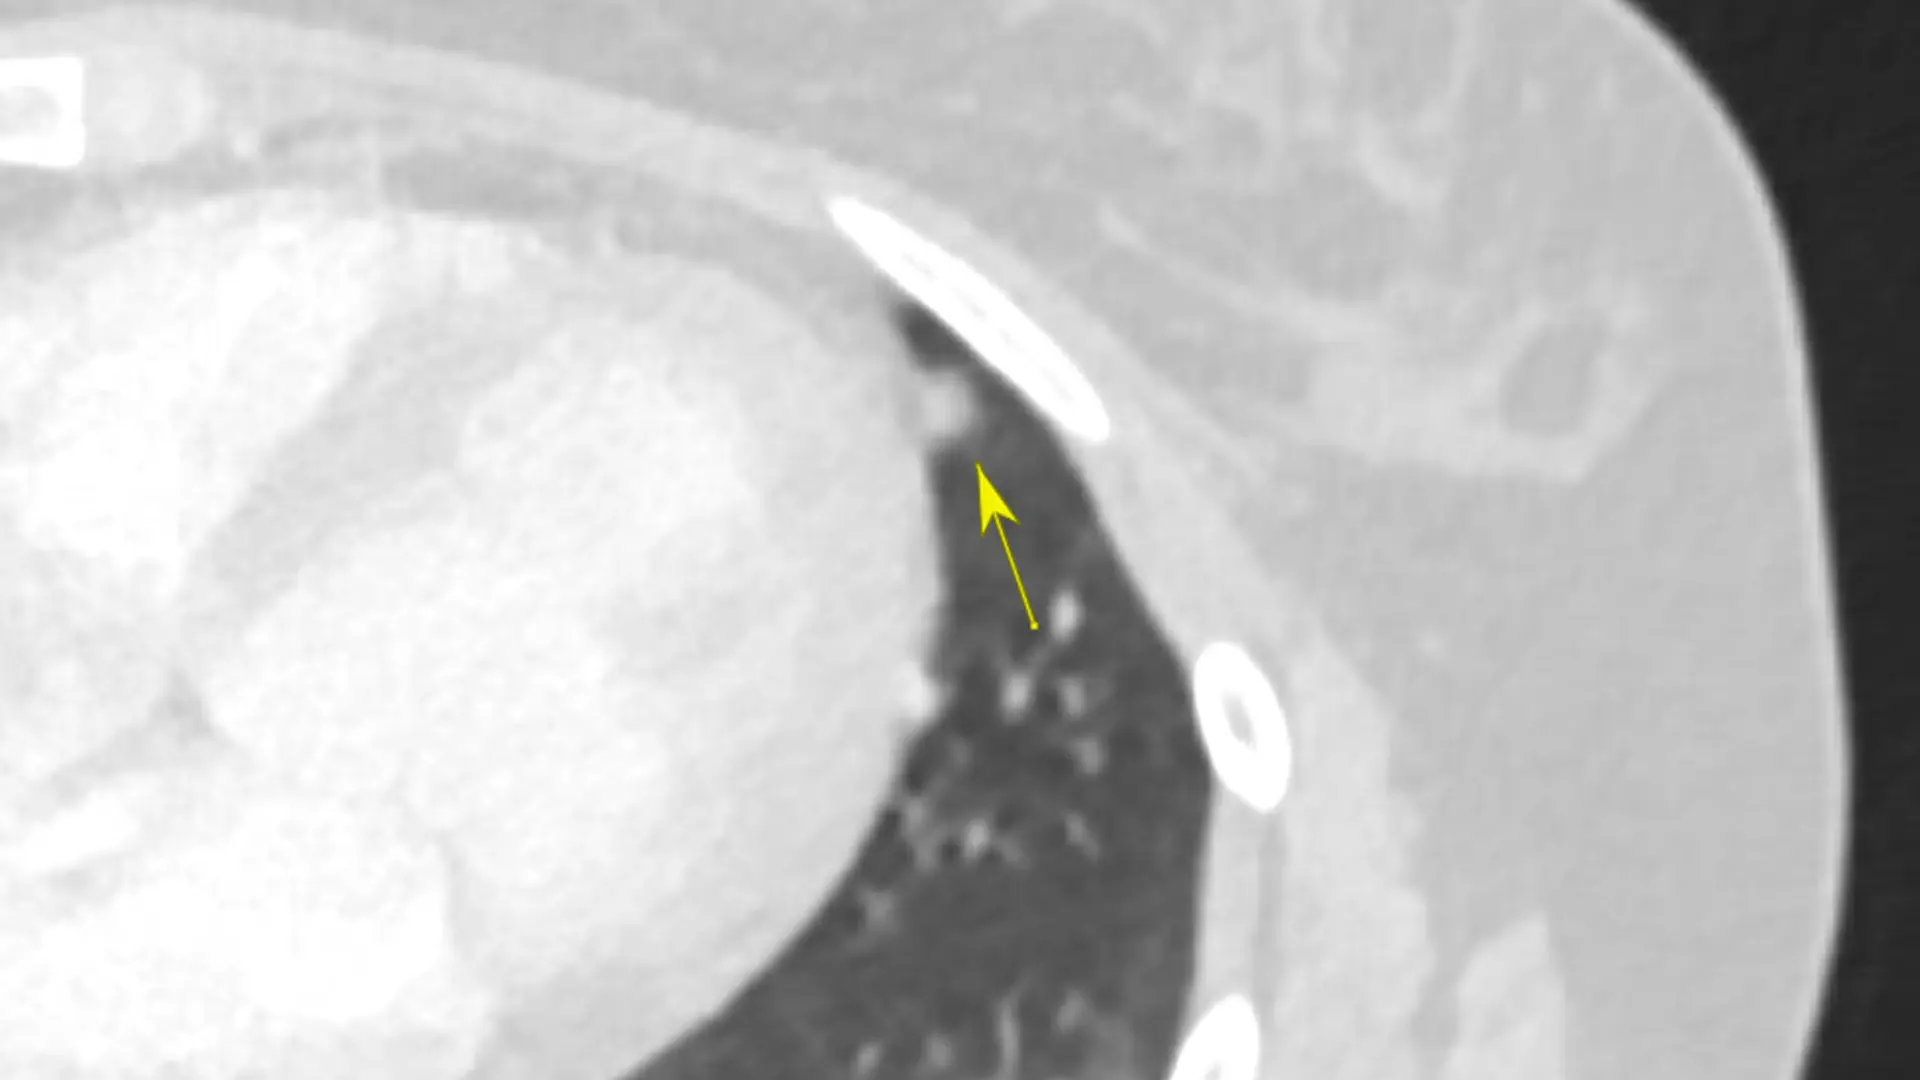 Solid nodule lingual 5 mm: according to Fleischner guidelines, in high-risk people this requires a follow-up in 12 months with a new CT.